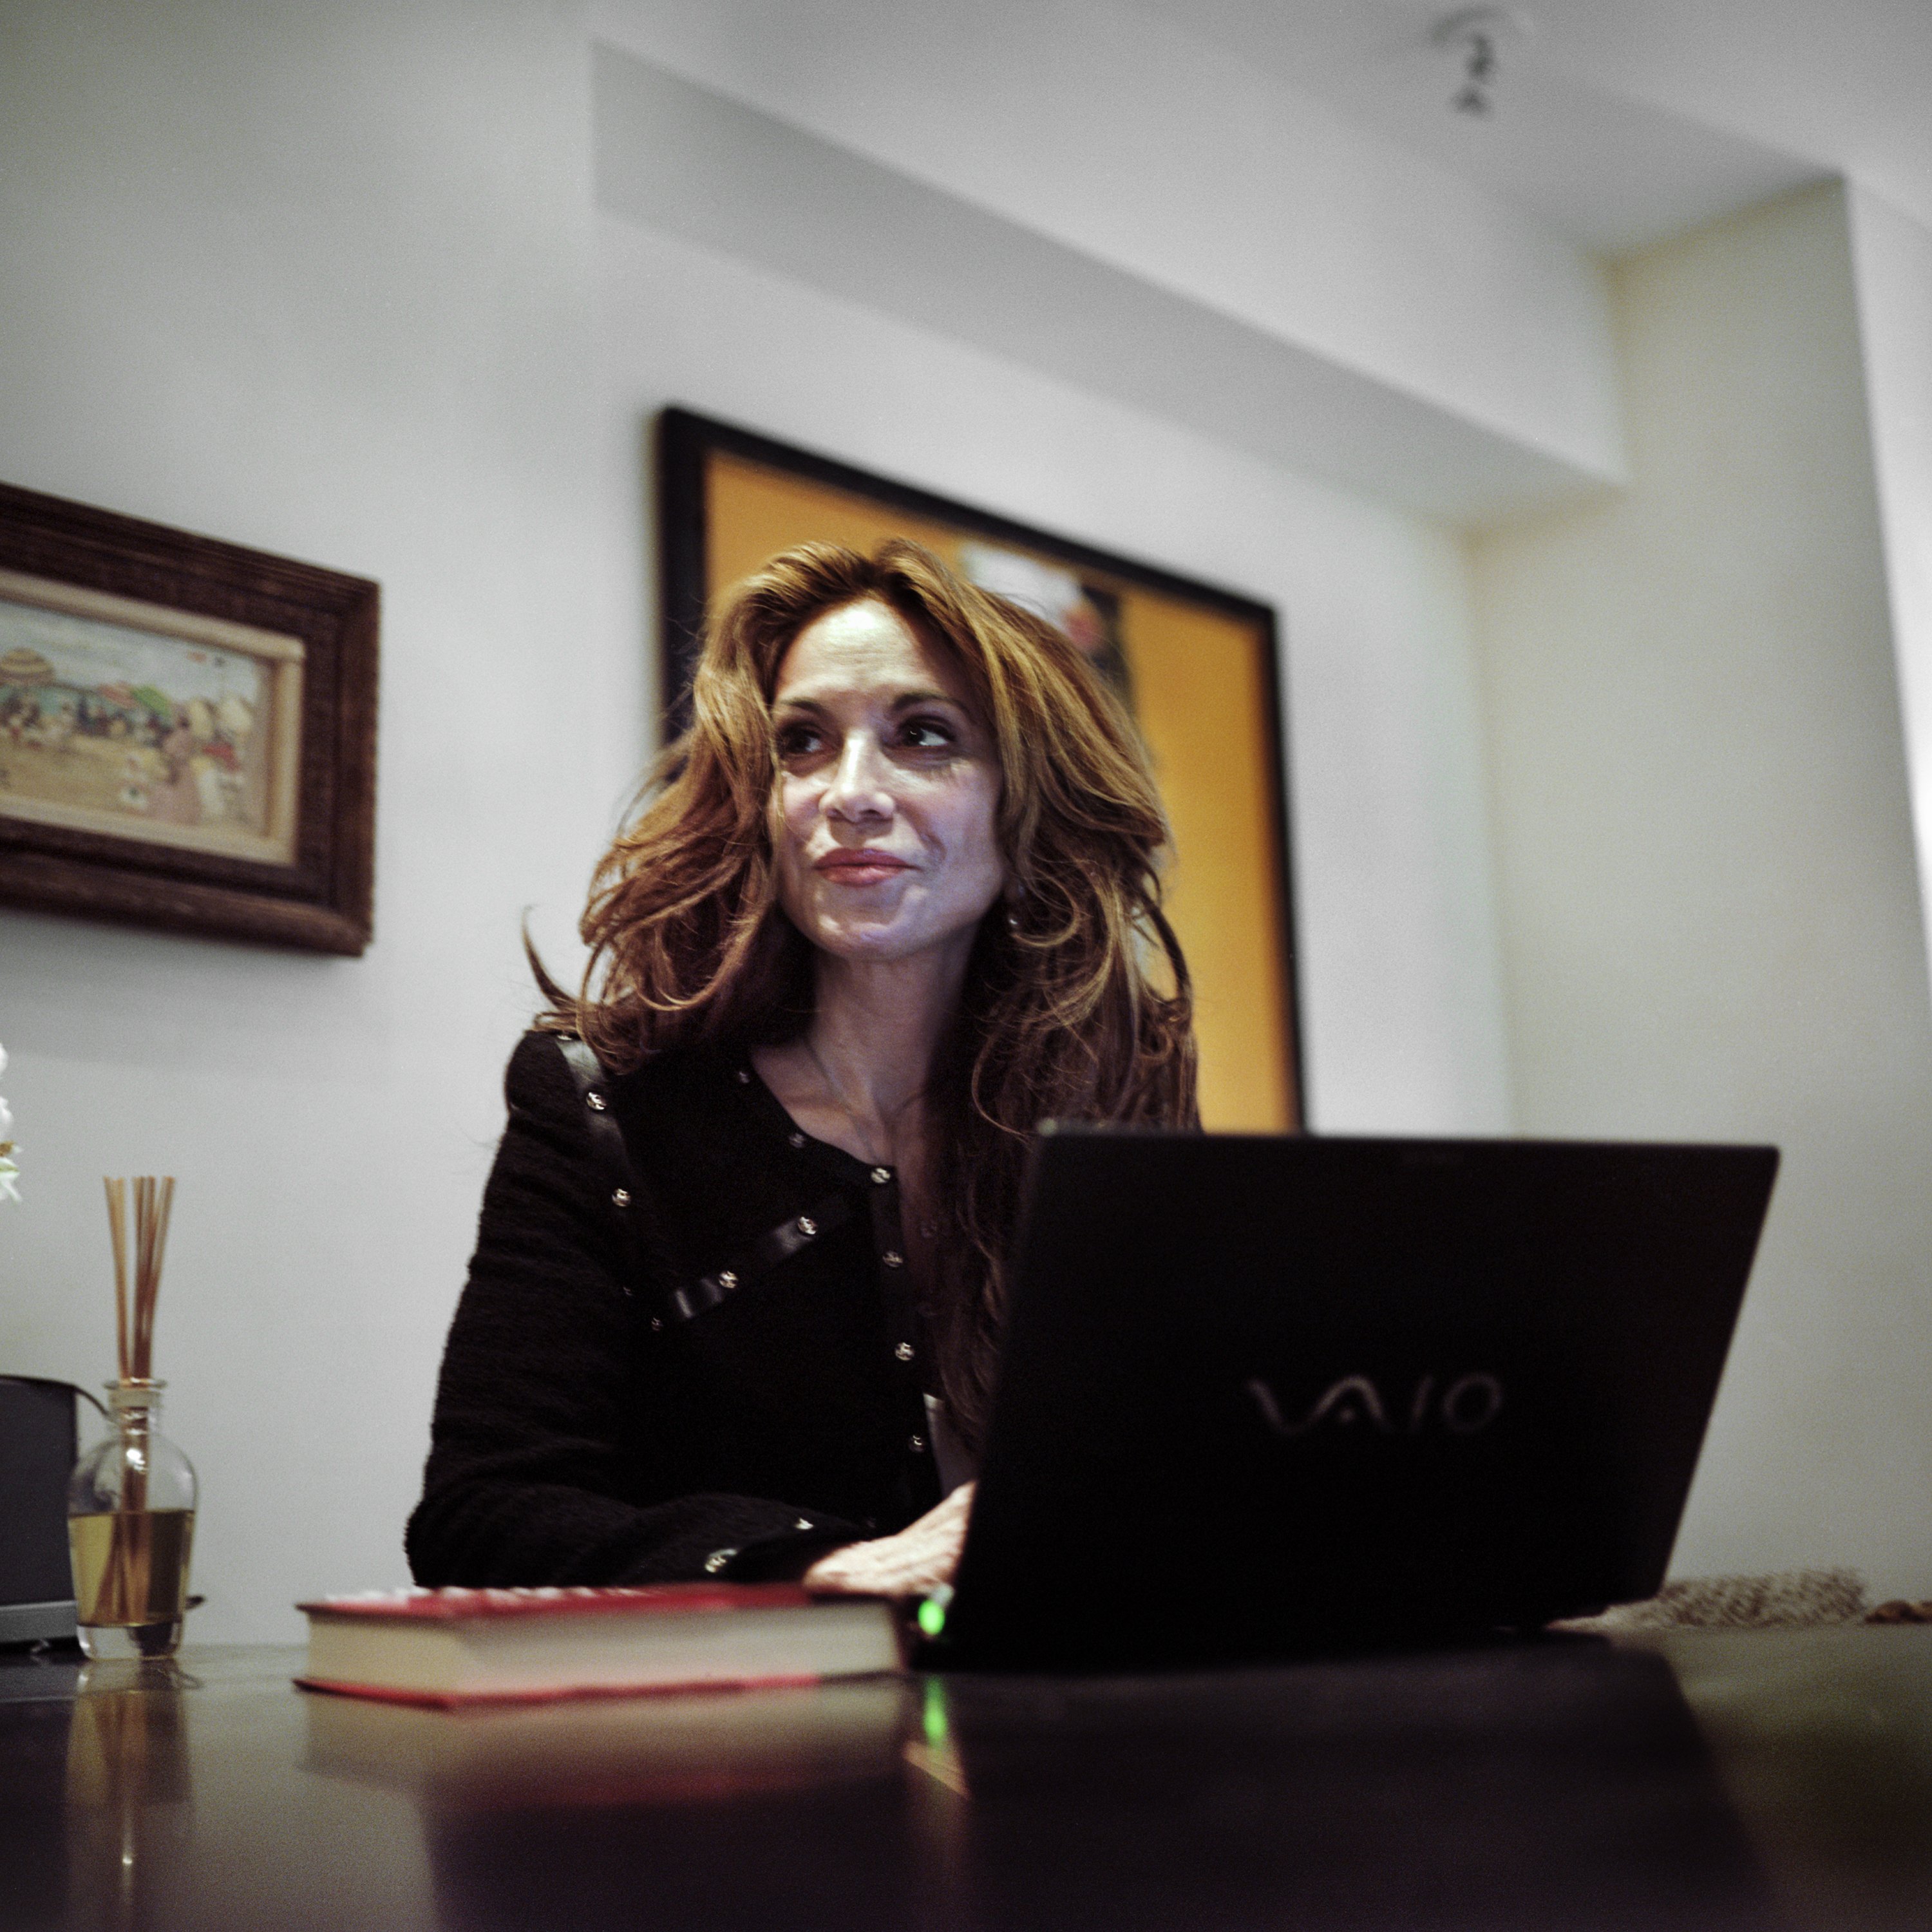 Pamela Geller, author of the book The Post-American Presidency answers emails inside her home on August 3, 2010 in New York City. (Jason Andrew—Getty Images)